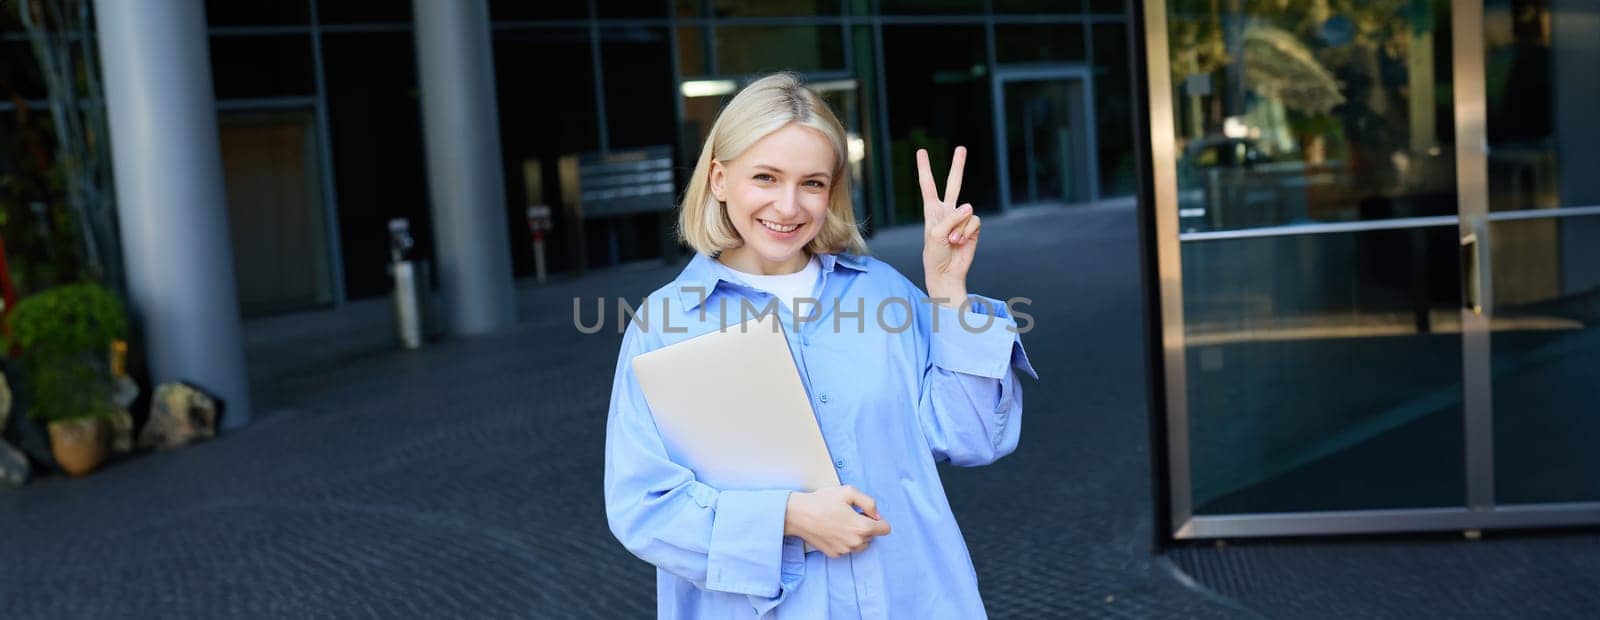 Young positive female model, student with notebooks and study material showing peace sign, standing near university, college campus, promo for new education scheme.